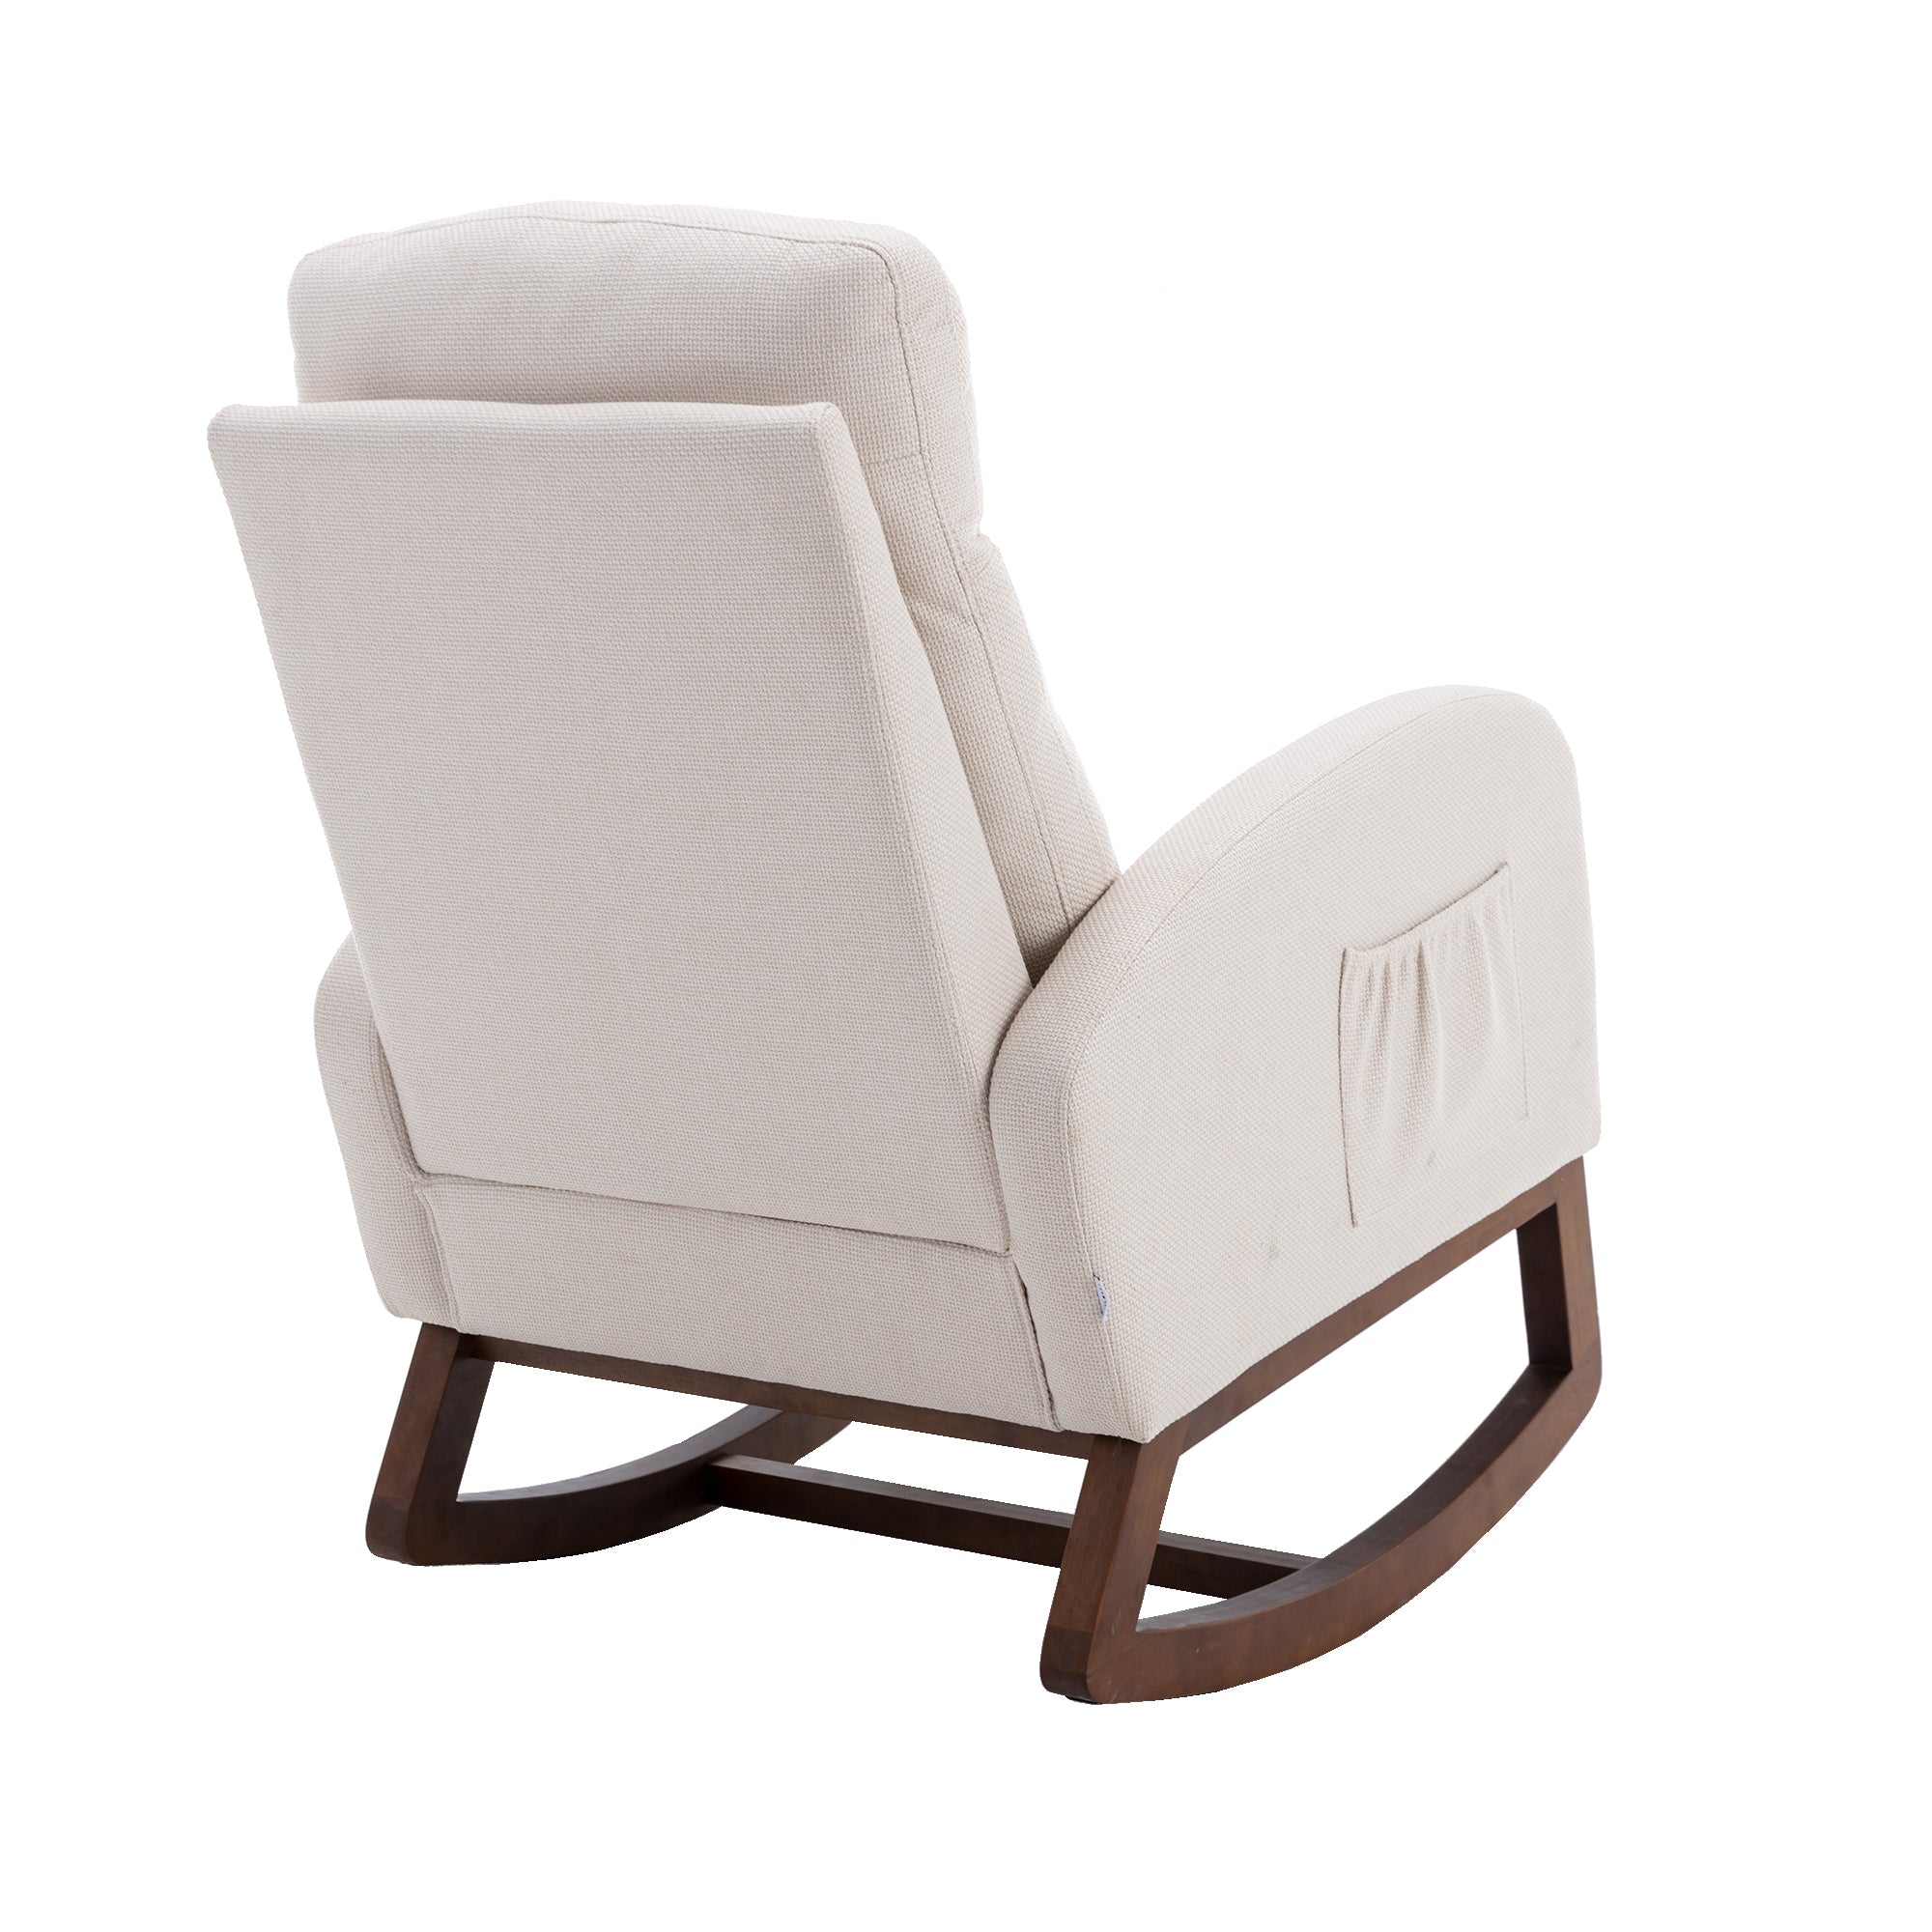 Comfortable Rocking Chair for Living Room- White- by Lissie Lou